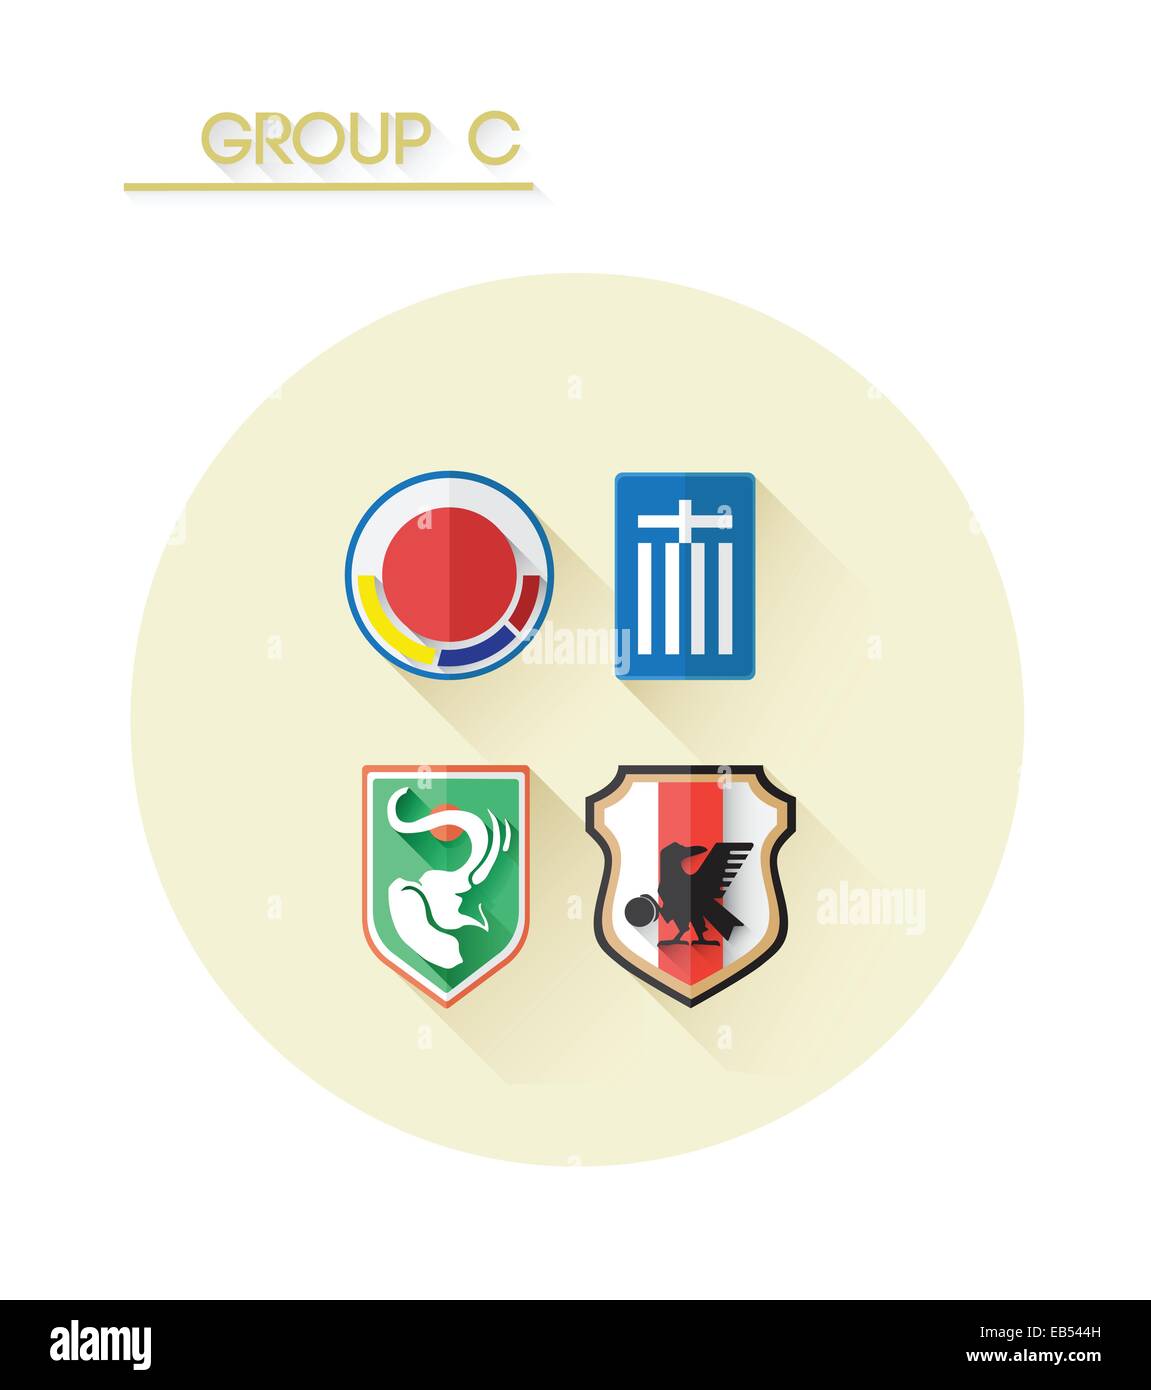 Group c with country crests Stock Vector